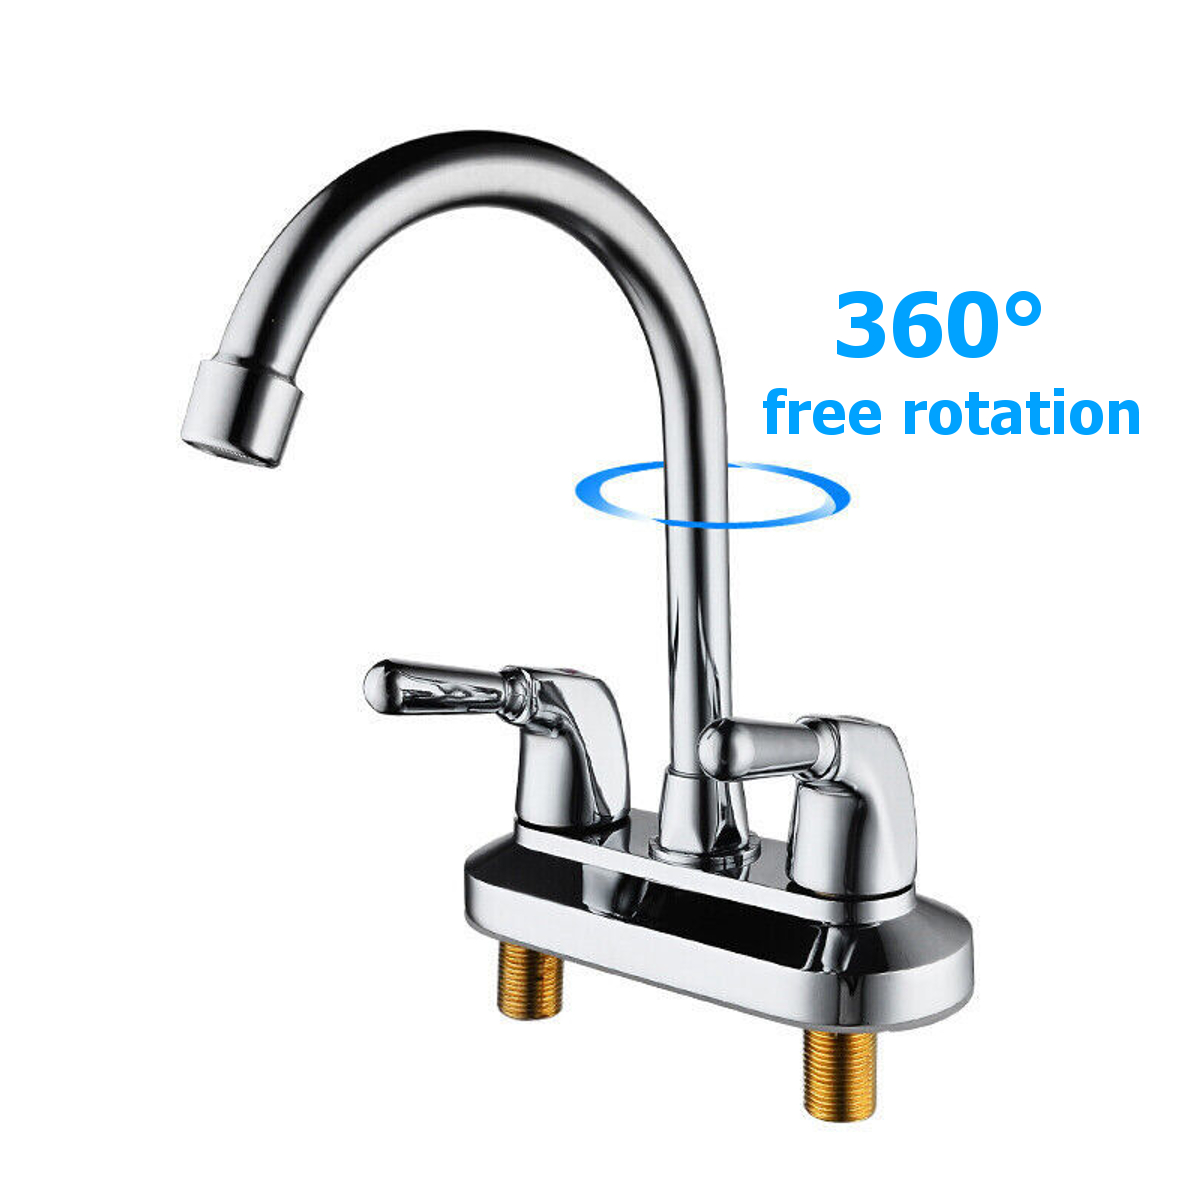 Novashion 360° Rotates Mixer Tap for Kitchen Faucet Double Holes and Handles Sink Faucet Basin Sink Mixer Water Tap - image 4 of 6